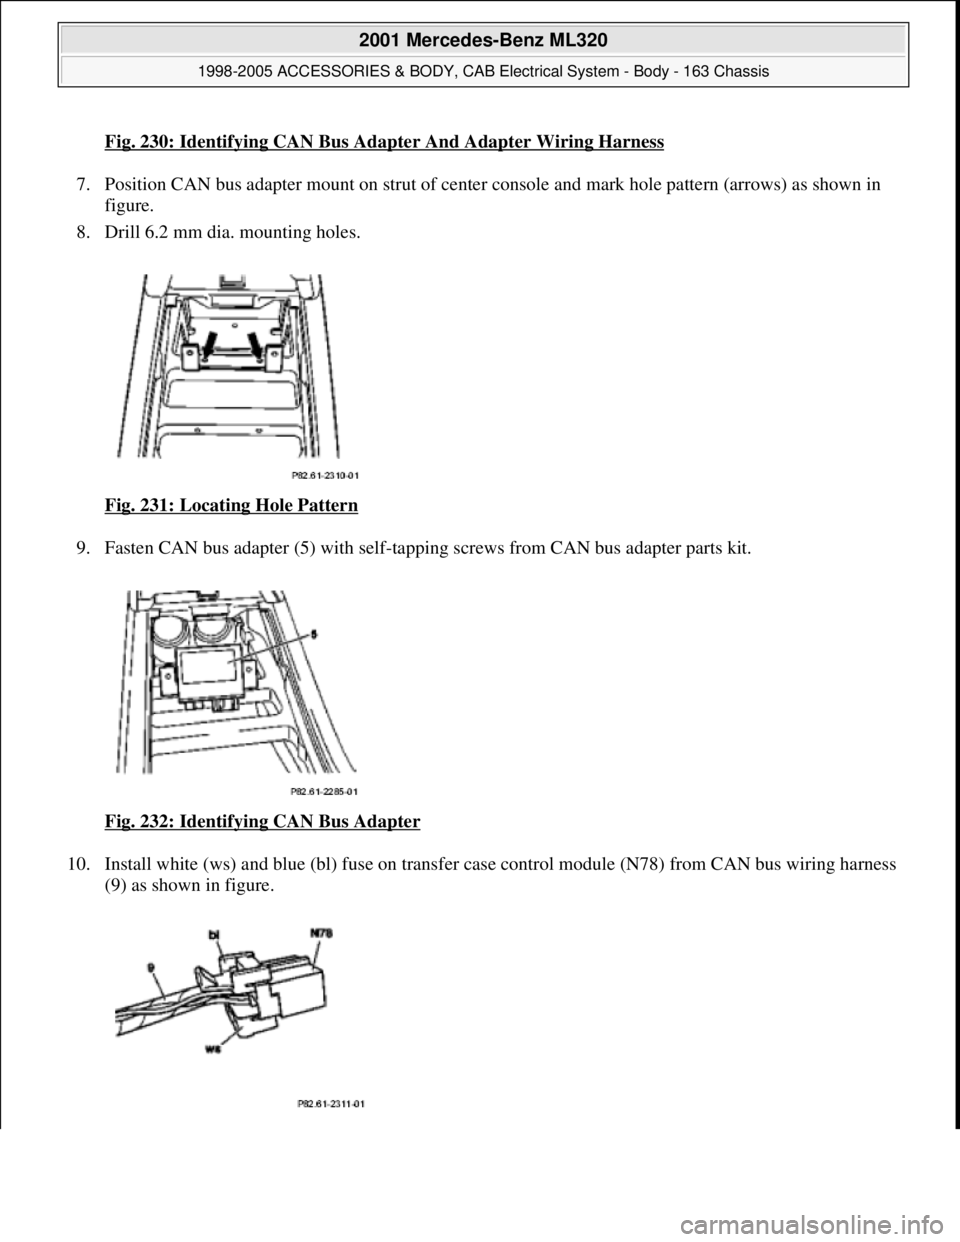 MERCEDES-BENZ ML500 1997  Complete Repair Manual Fig. 230: Identifying CAN Bus Adapter And Adapter Wiring Harness
7. Position CAN bus adapter mount on st rut of center console and mark hole pattern (arrows) as shown in  
figure.   
8. Drill 6.2 mm d